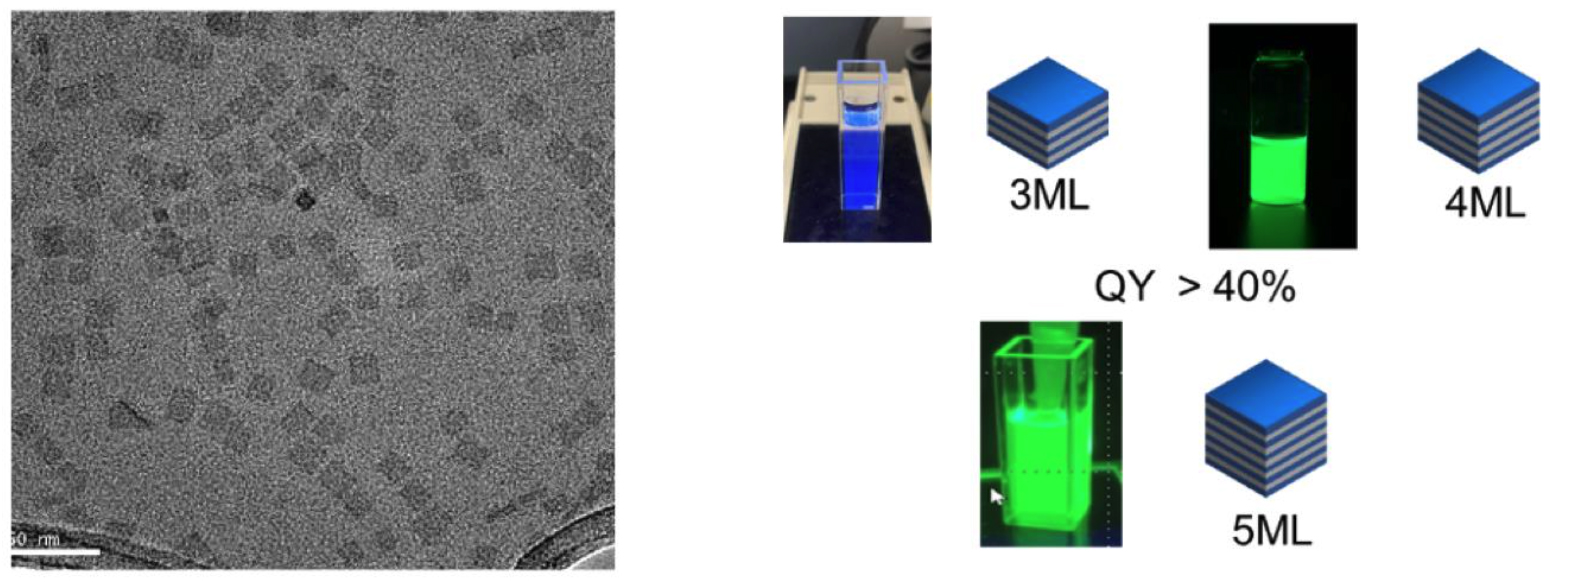 <b>(Left)</b> TEM micrograph of 4 monolayer CdSe NPLs. The scale bar defines a 50 nm length. <b>(Right)</b> Optical properties of 3, 4 and 5 monolayer NPLs. Photoluminescence emission shifts to longer wavelengths as the number of monolayers increases.